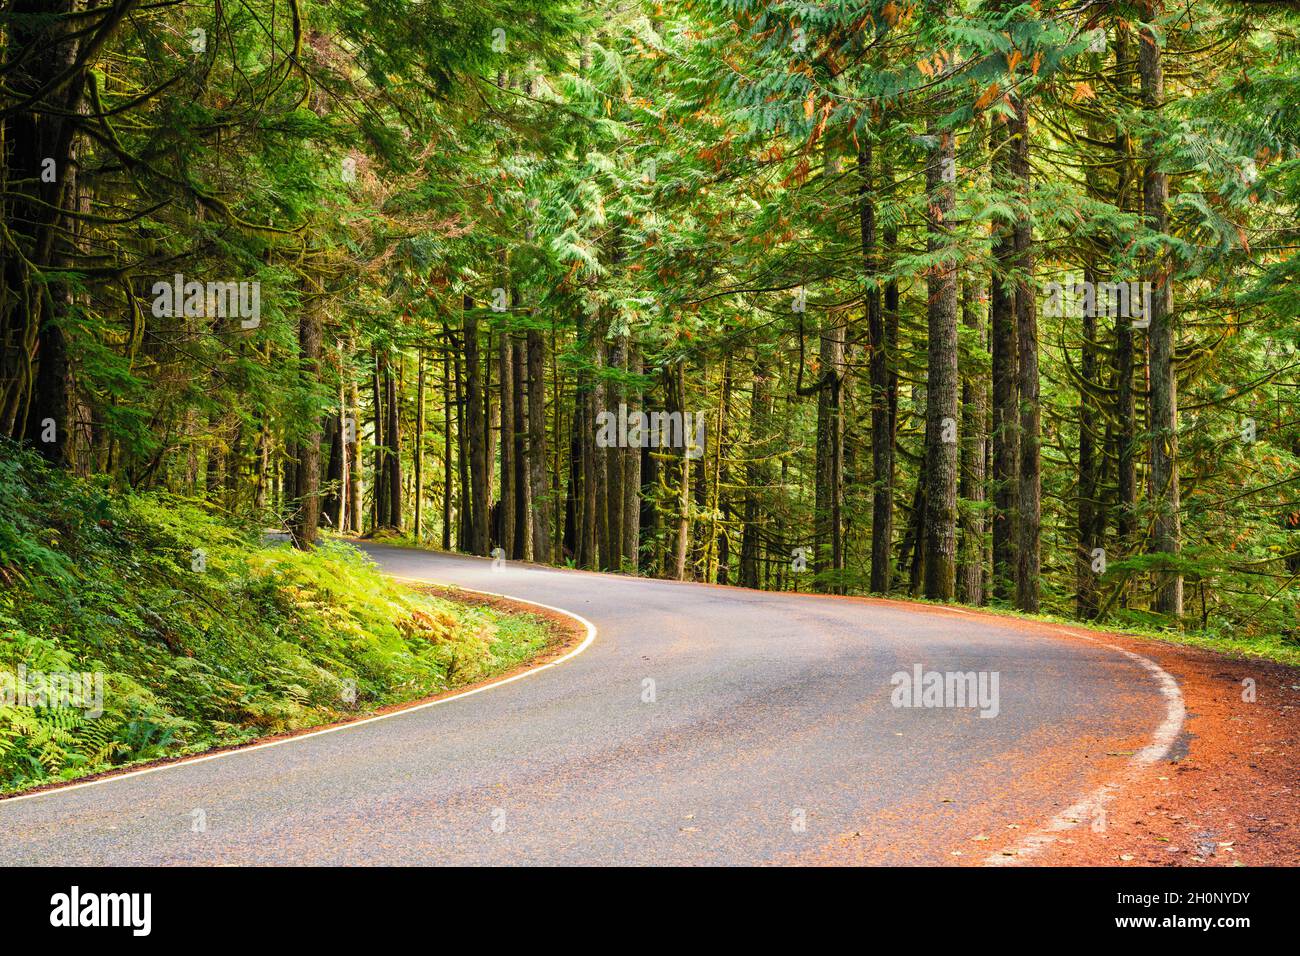 A curve in the road along the Old Cascade Highway between tall green fir trees with orange needles lining the edge of the country road Stock Photo